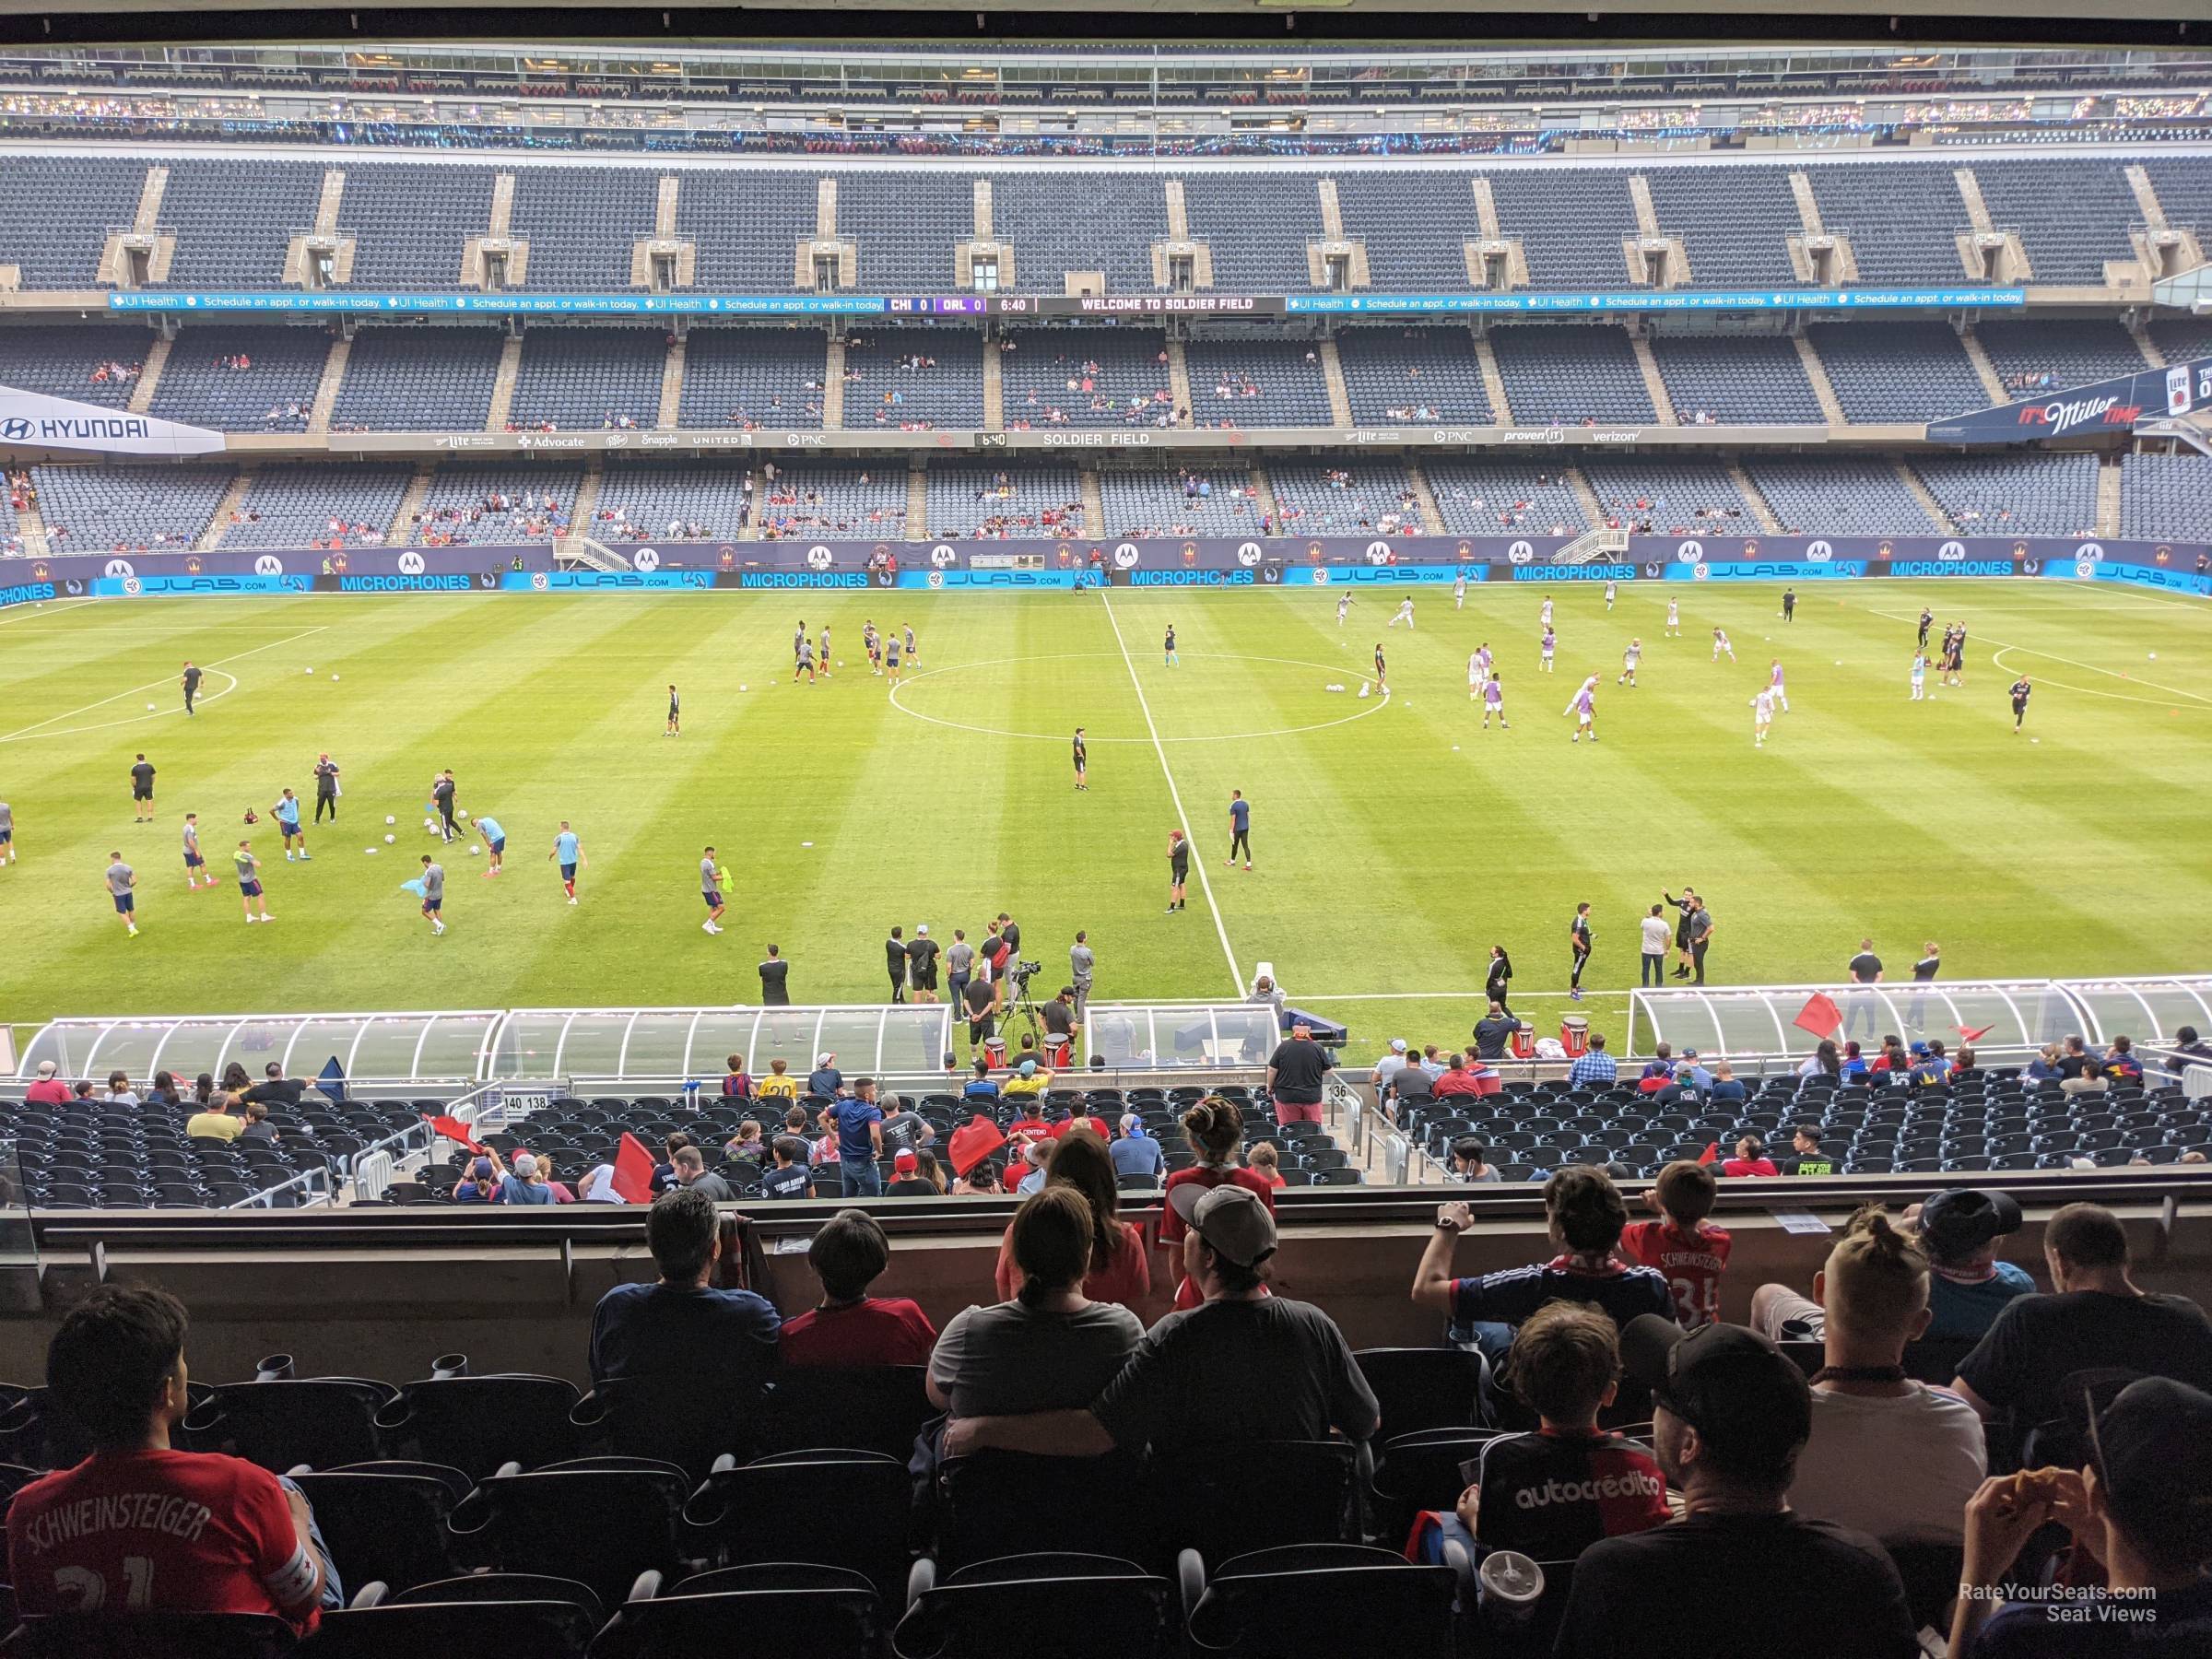 section 237, row 6 seat view  for soccer - soldier field